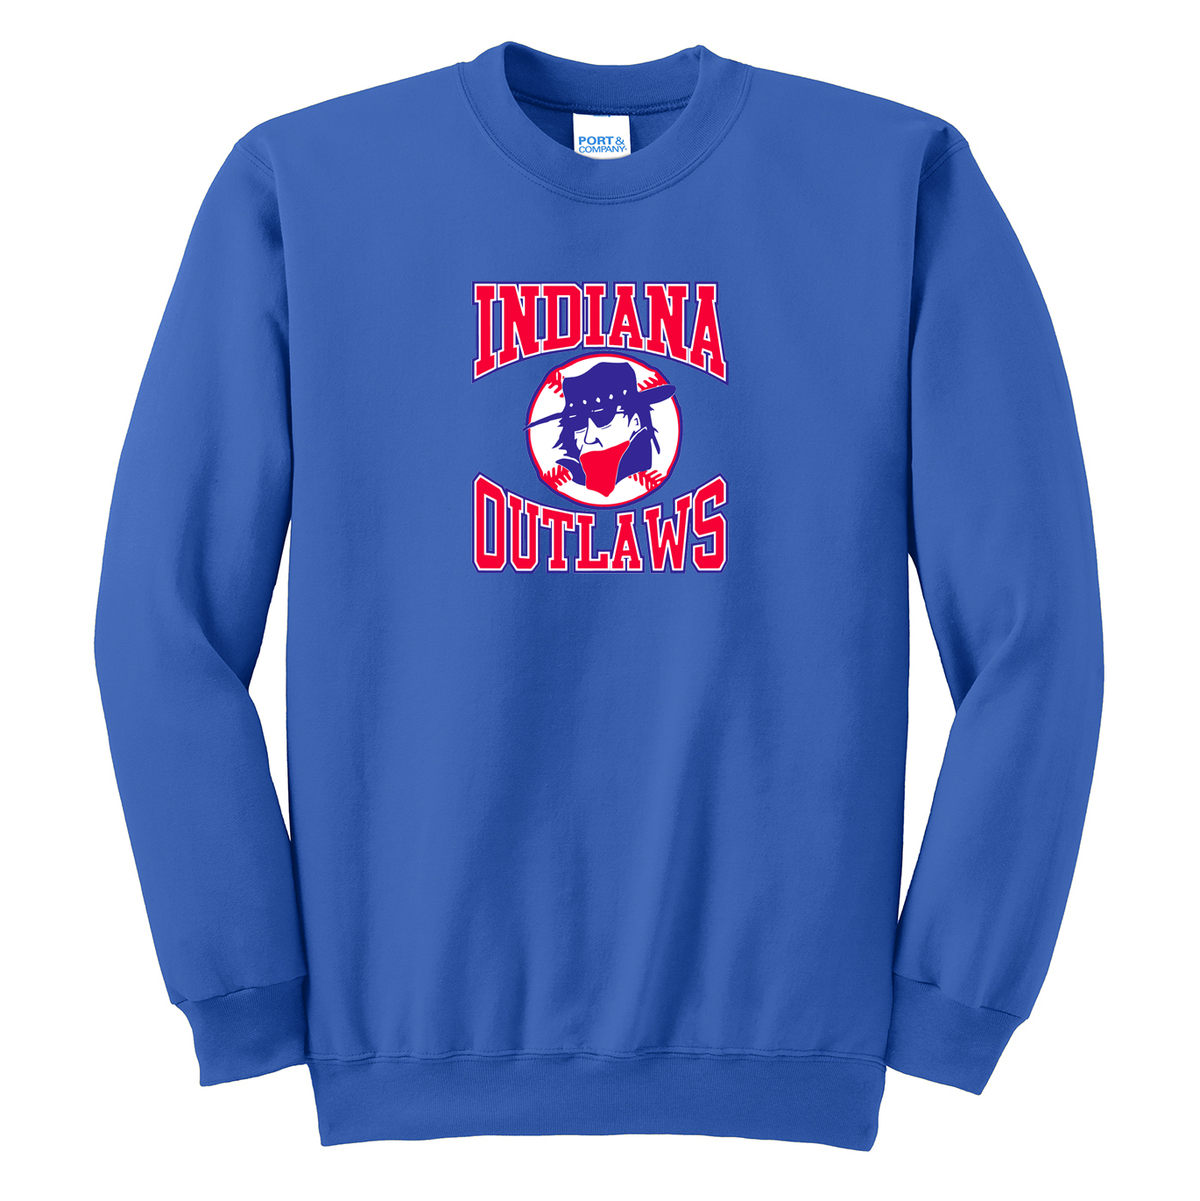 Southern Indiana Outlaws Baseball Crew Neck Sweater